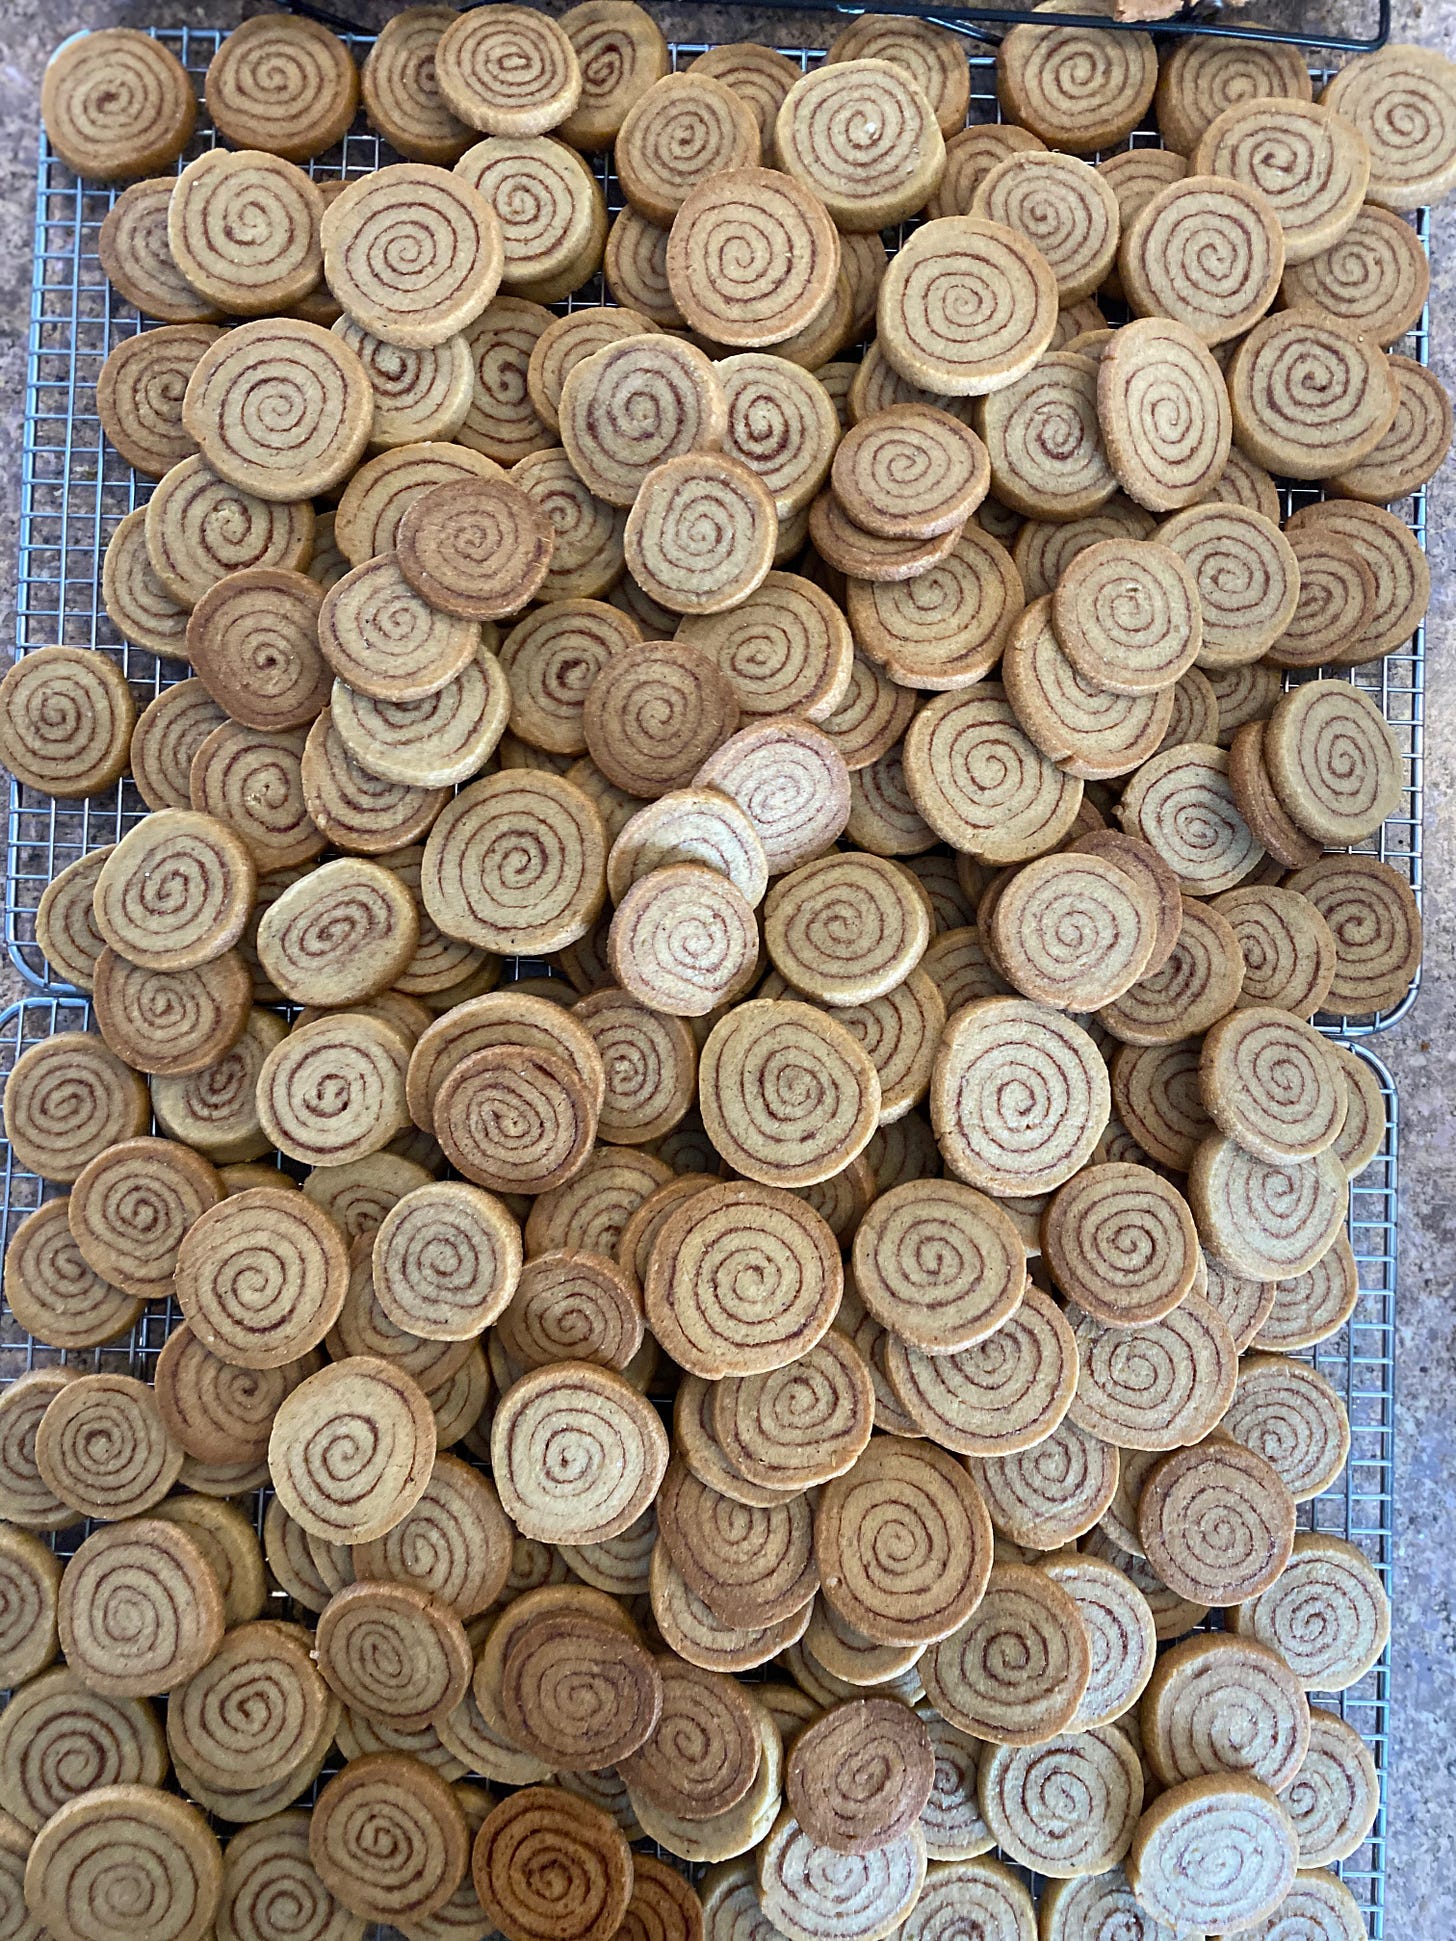 A huge pile of small round cookies with a spiral pattern of golden cookie and dark cinnamon filling.